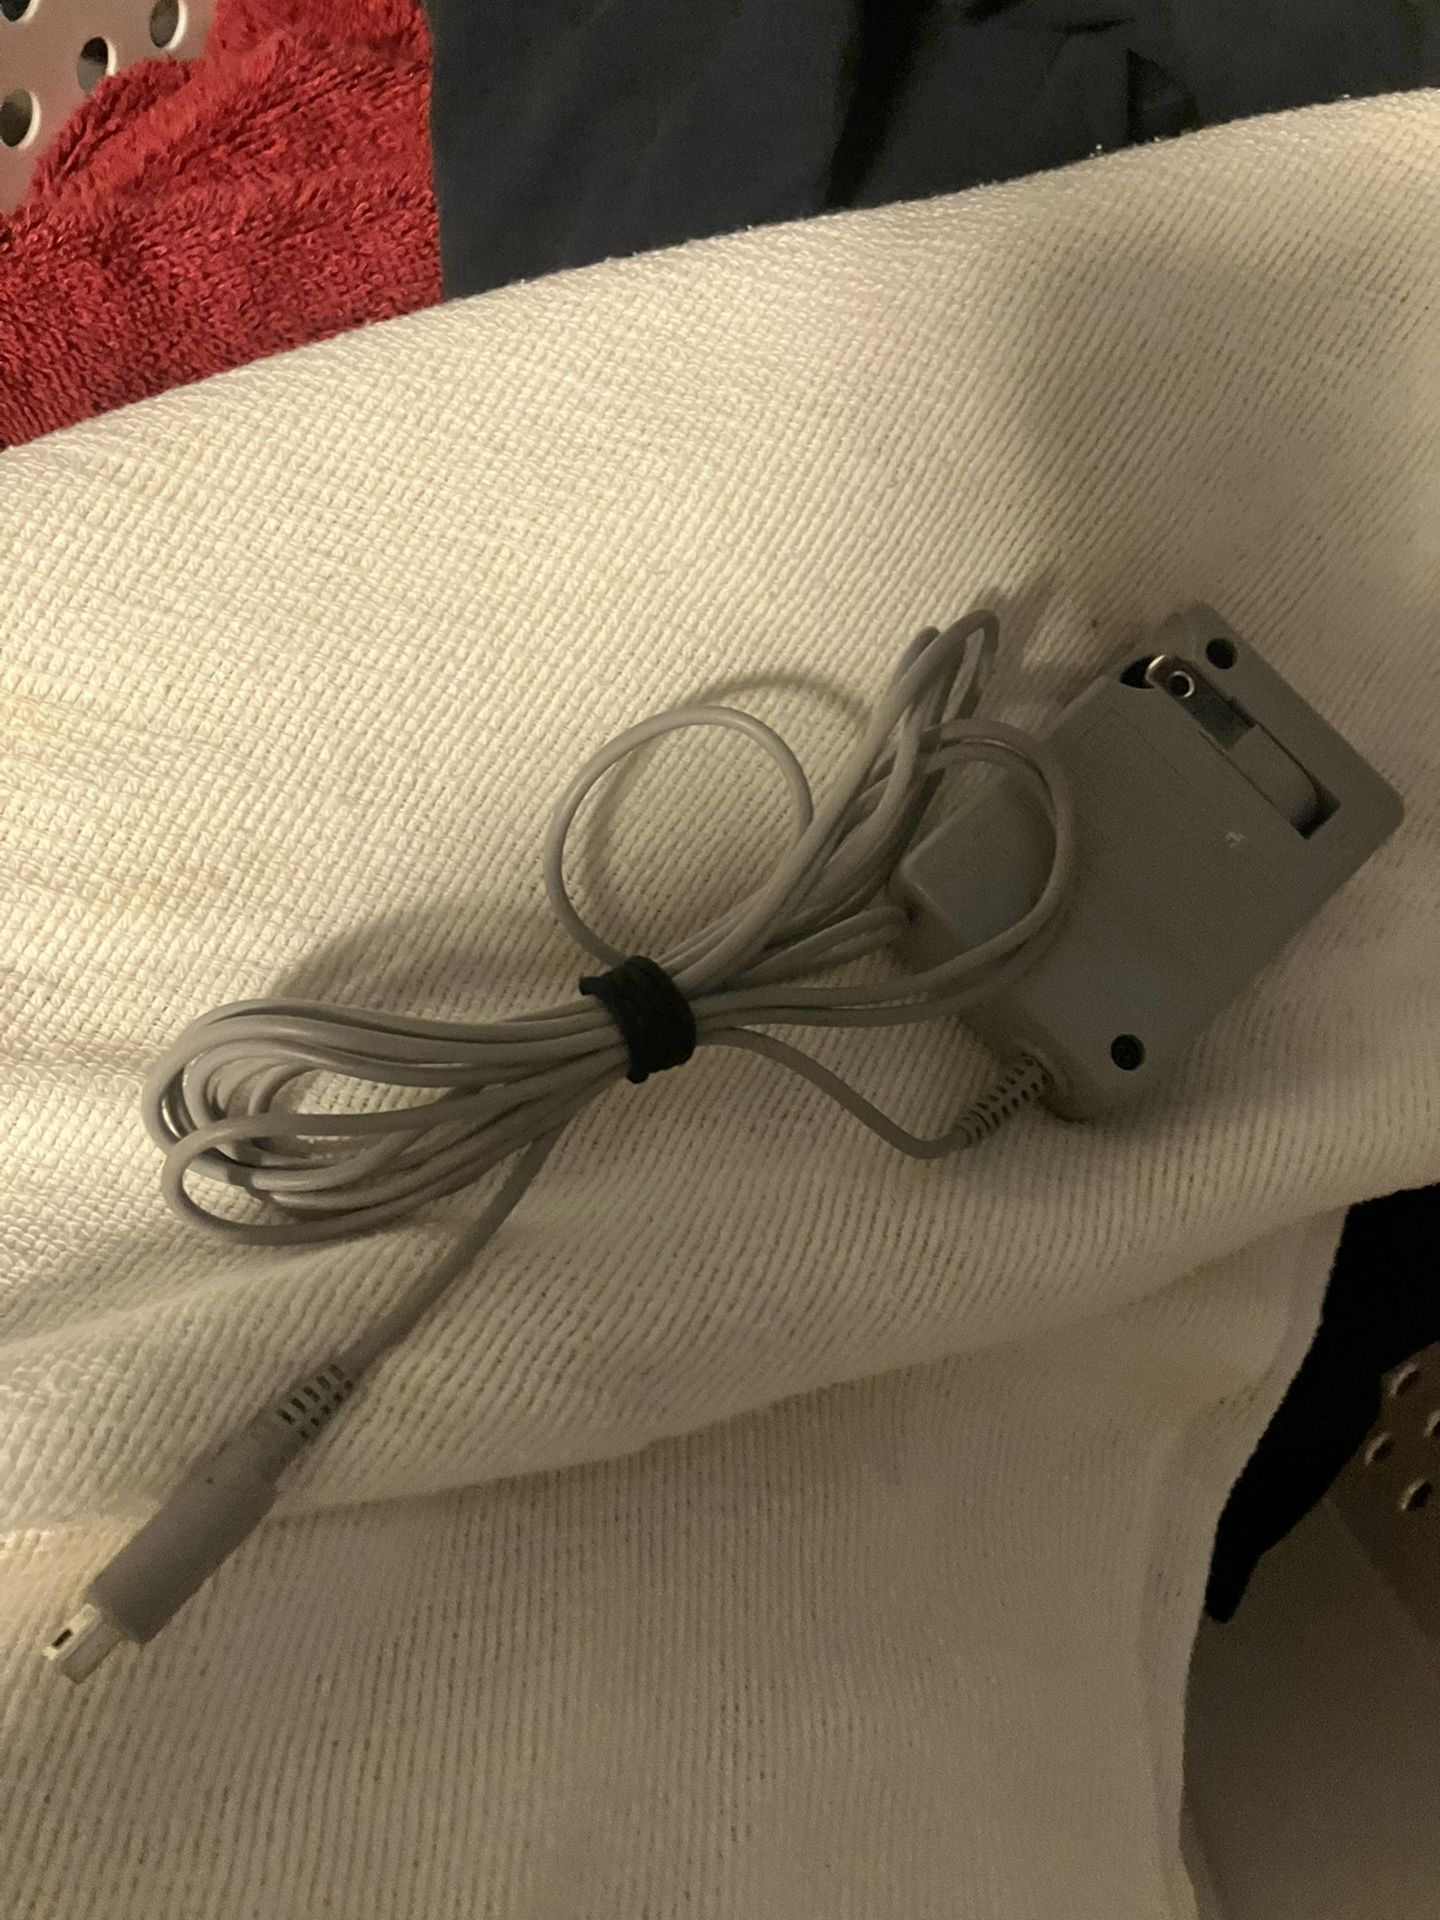 Nintendo 3ds Charger